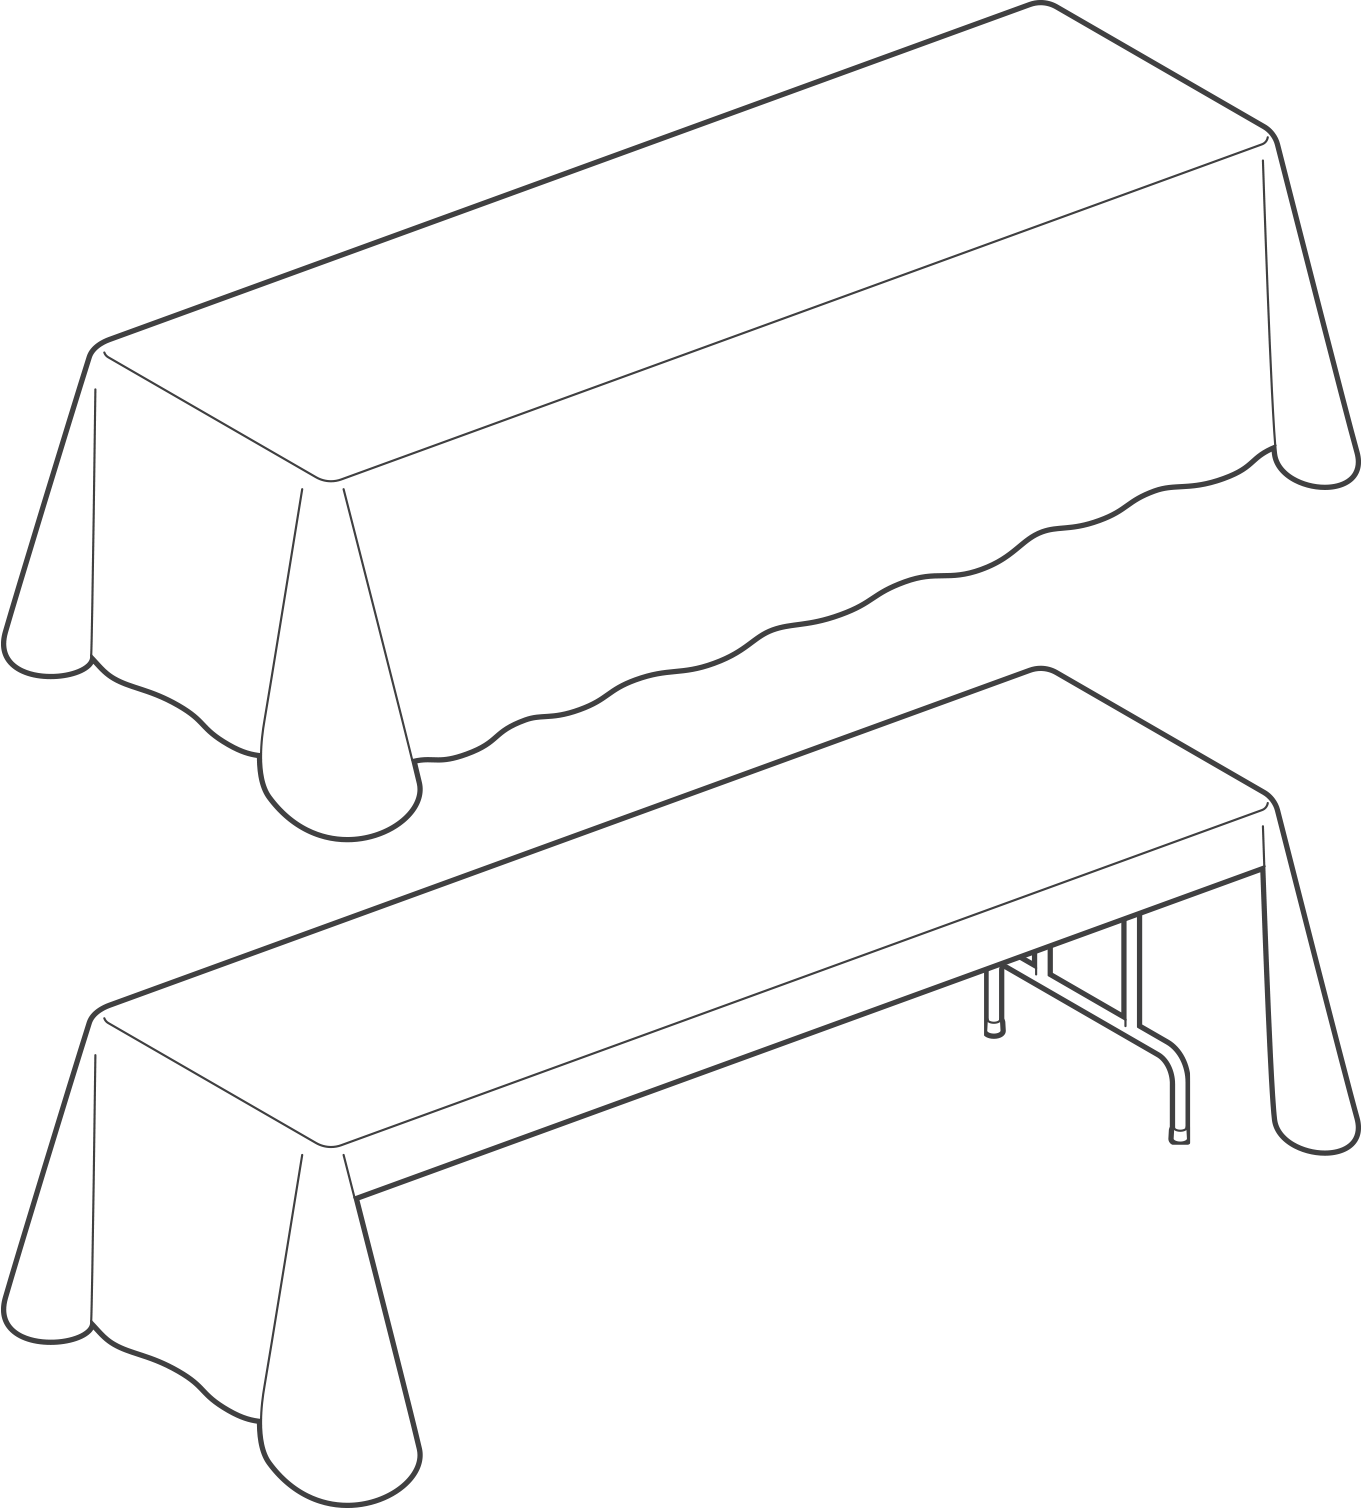 150 5 × 62 75 Tablecloth Template